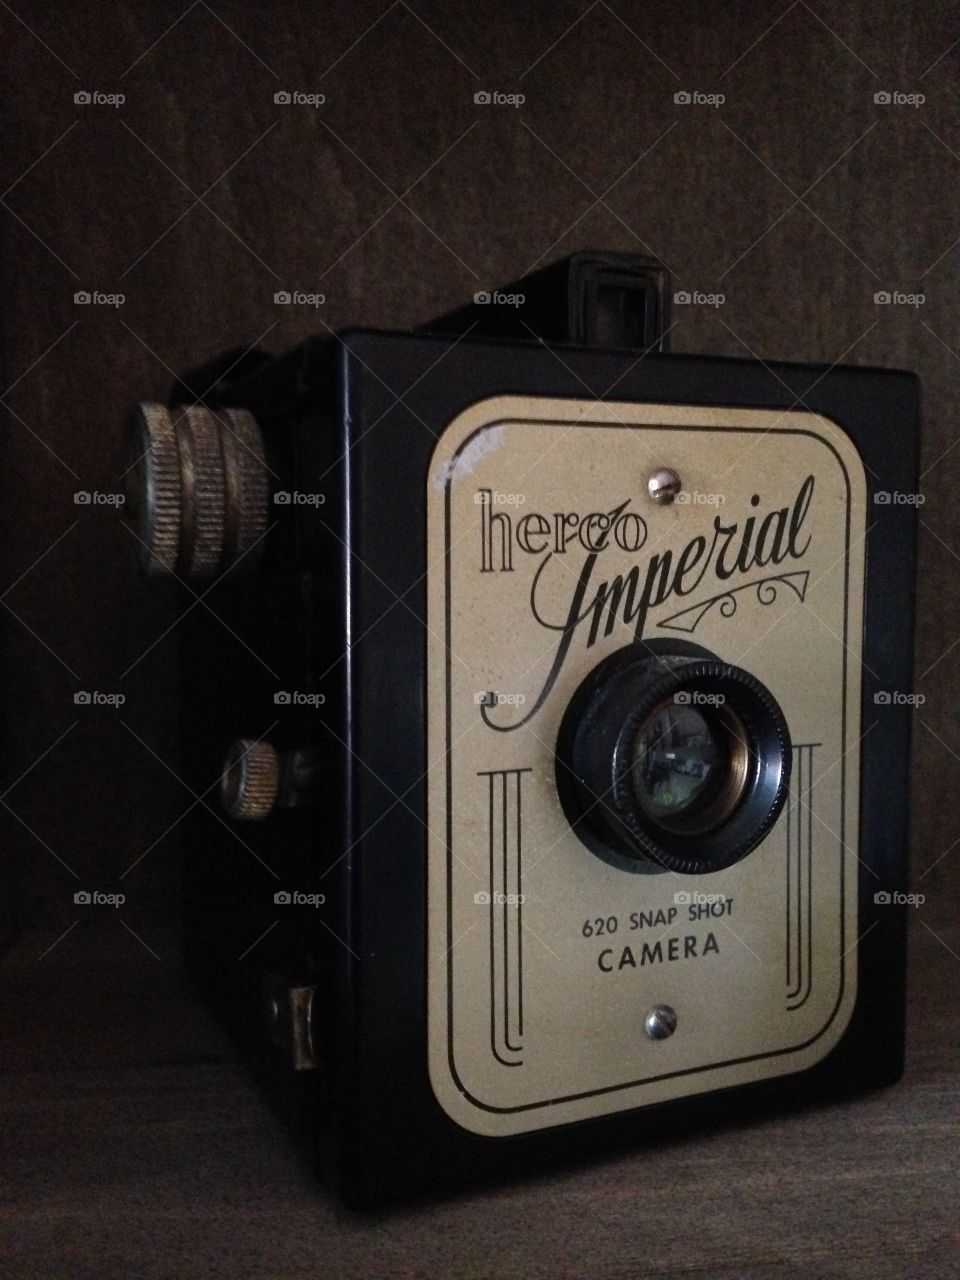 Retro camera. Snap shot from the past